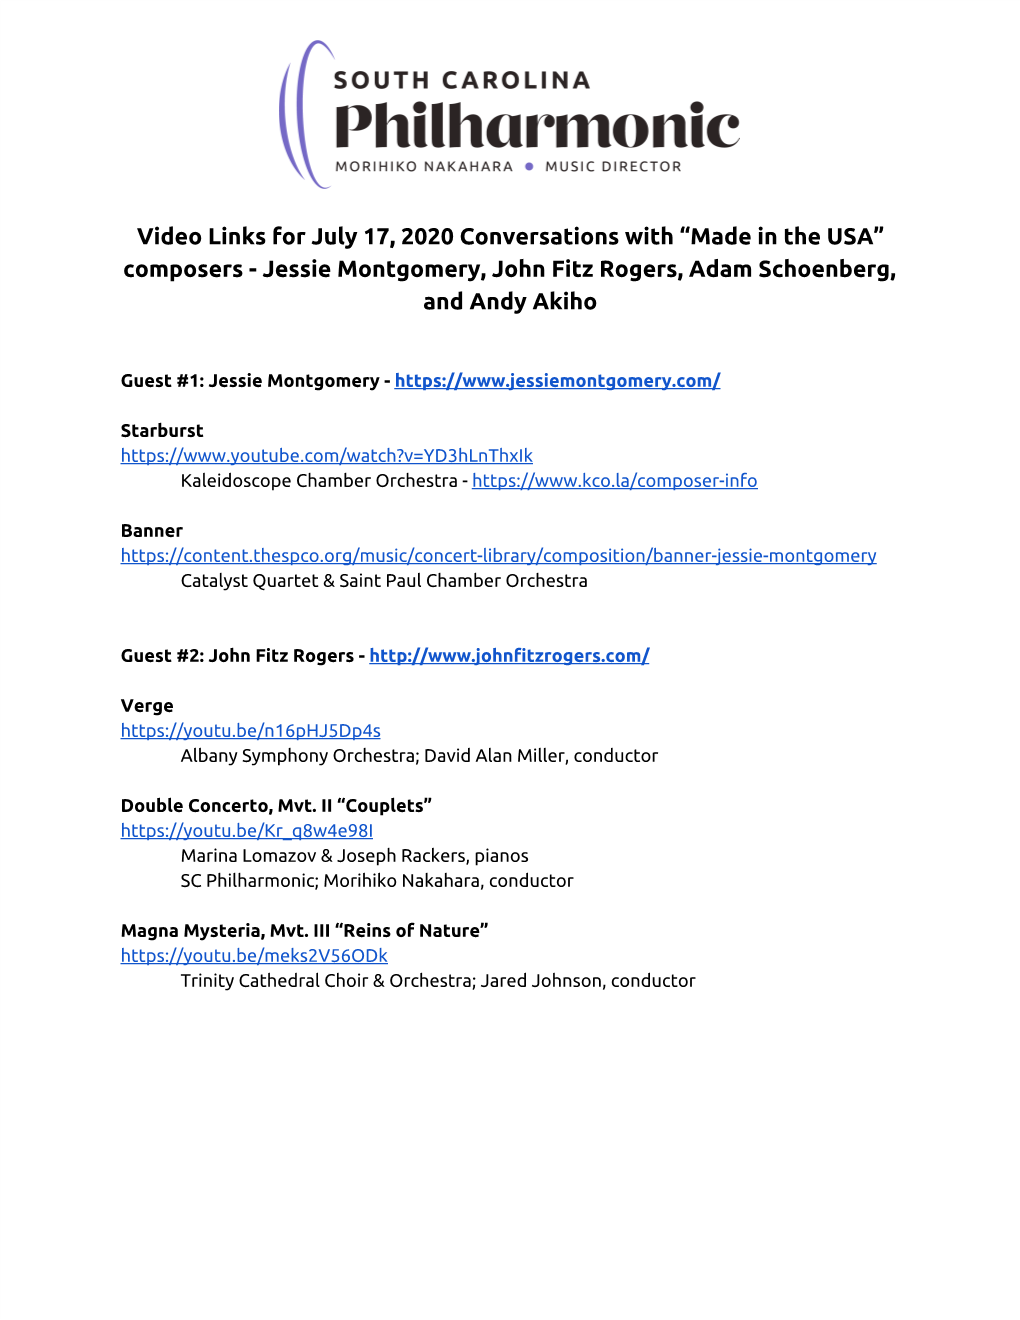 Video Links for July 17, 2020 Conversations with “Made in the USA” Composers - Jessie Montgomery, John Fitz Rogers, Adam Schoenberg, and Andy Akiho